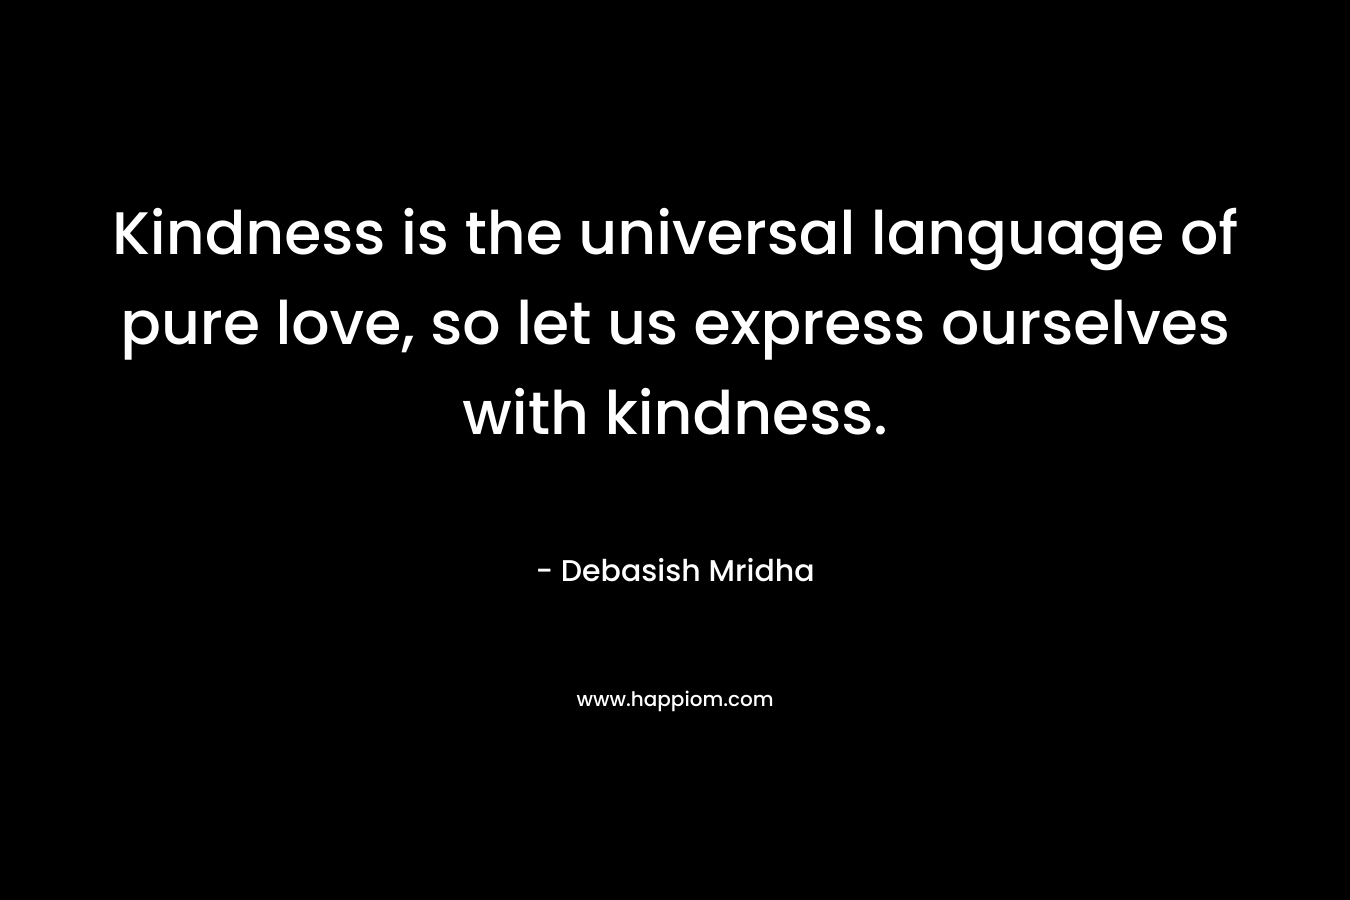 Kindness is the universal language of pure love, so let us express ourselves with kindness.